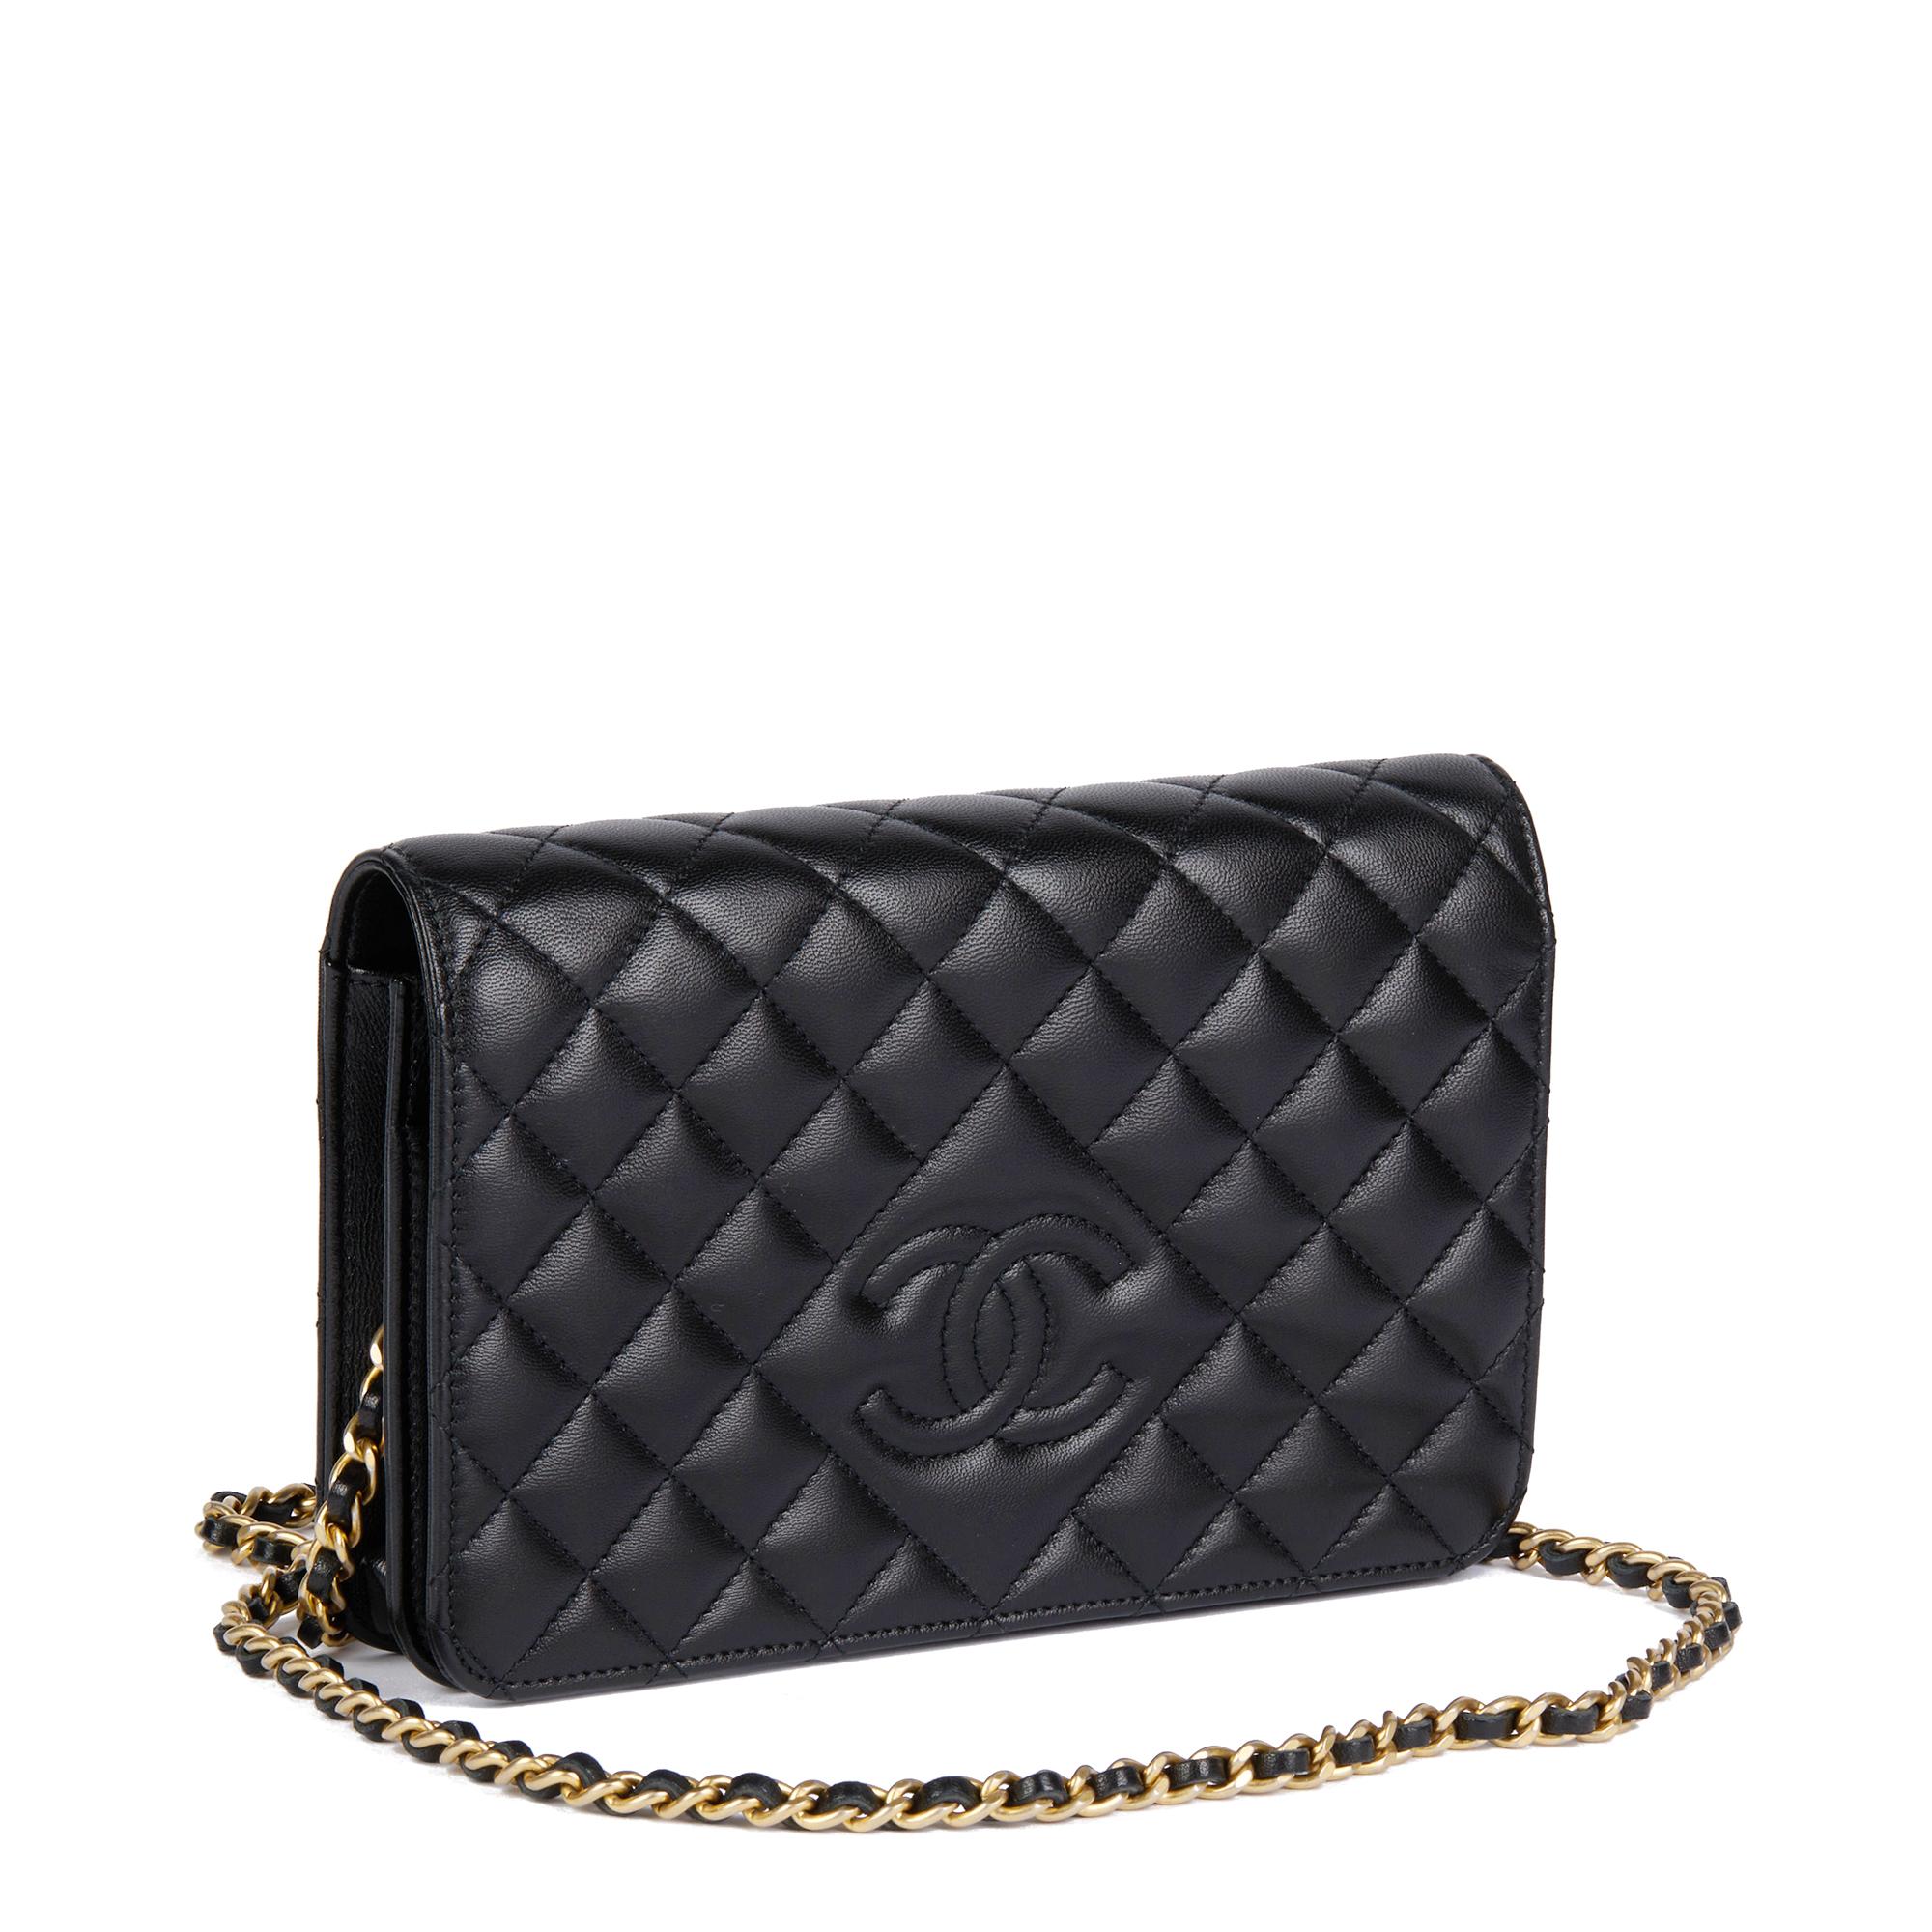 CHANEL
Black Quilted Lambskin Timeless Wallet-on-Chain WOC

Xupes Reference: HB4799
Serial Number: 19494847
Age (Circa): 2014
Accompanied By: Chanel Dust Bag, Box, Authenticity Card, Care Booklet, Protective Felt
Authenticity Details: Authenticity